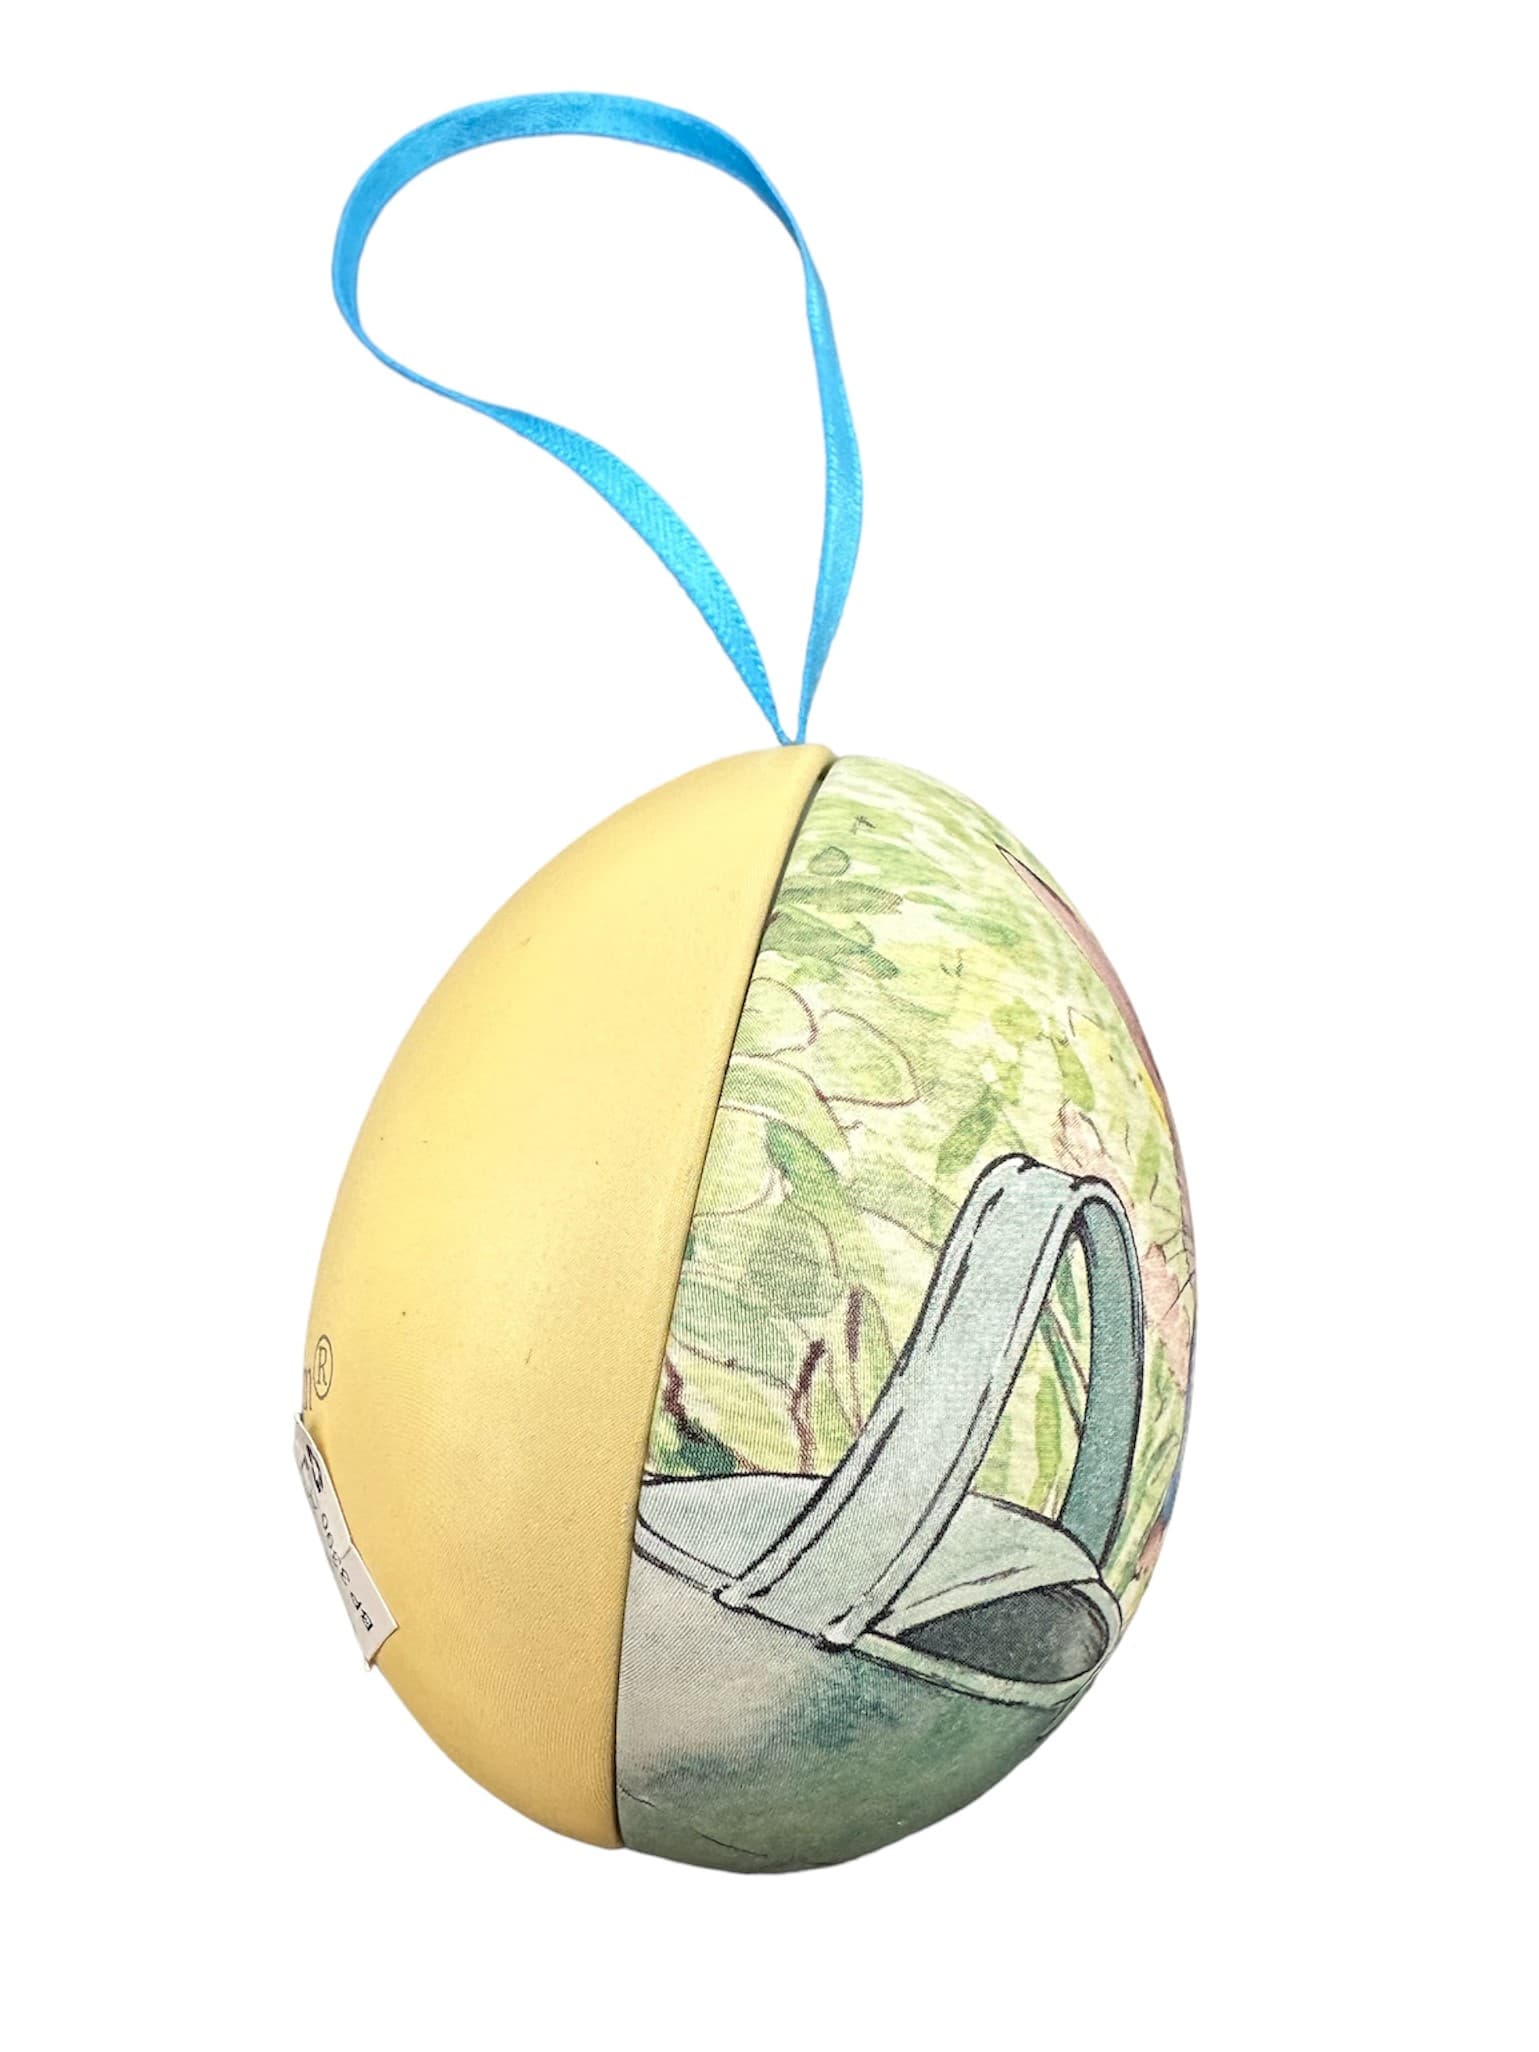 Peter Rabbit Tin - YELLOW with blue string